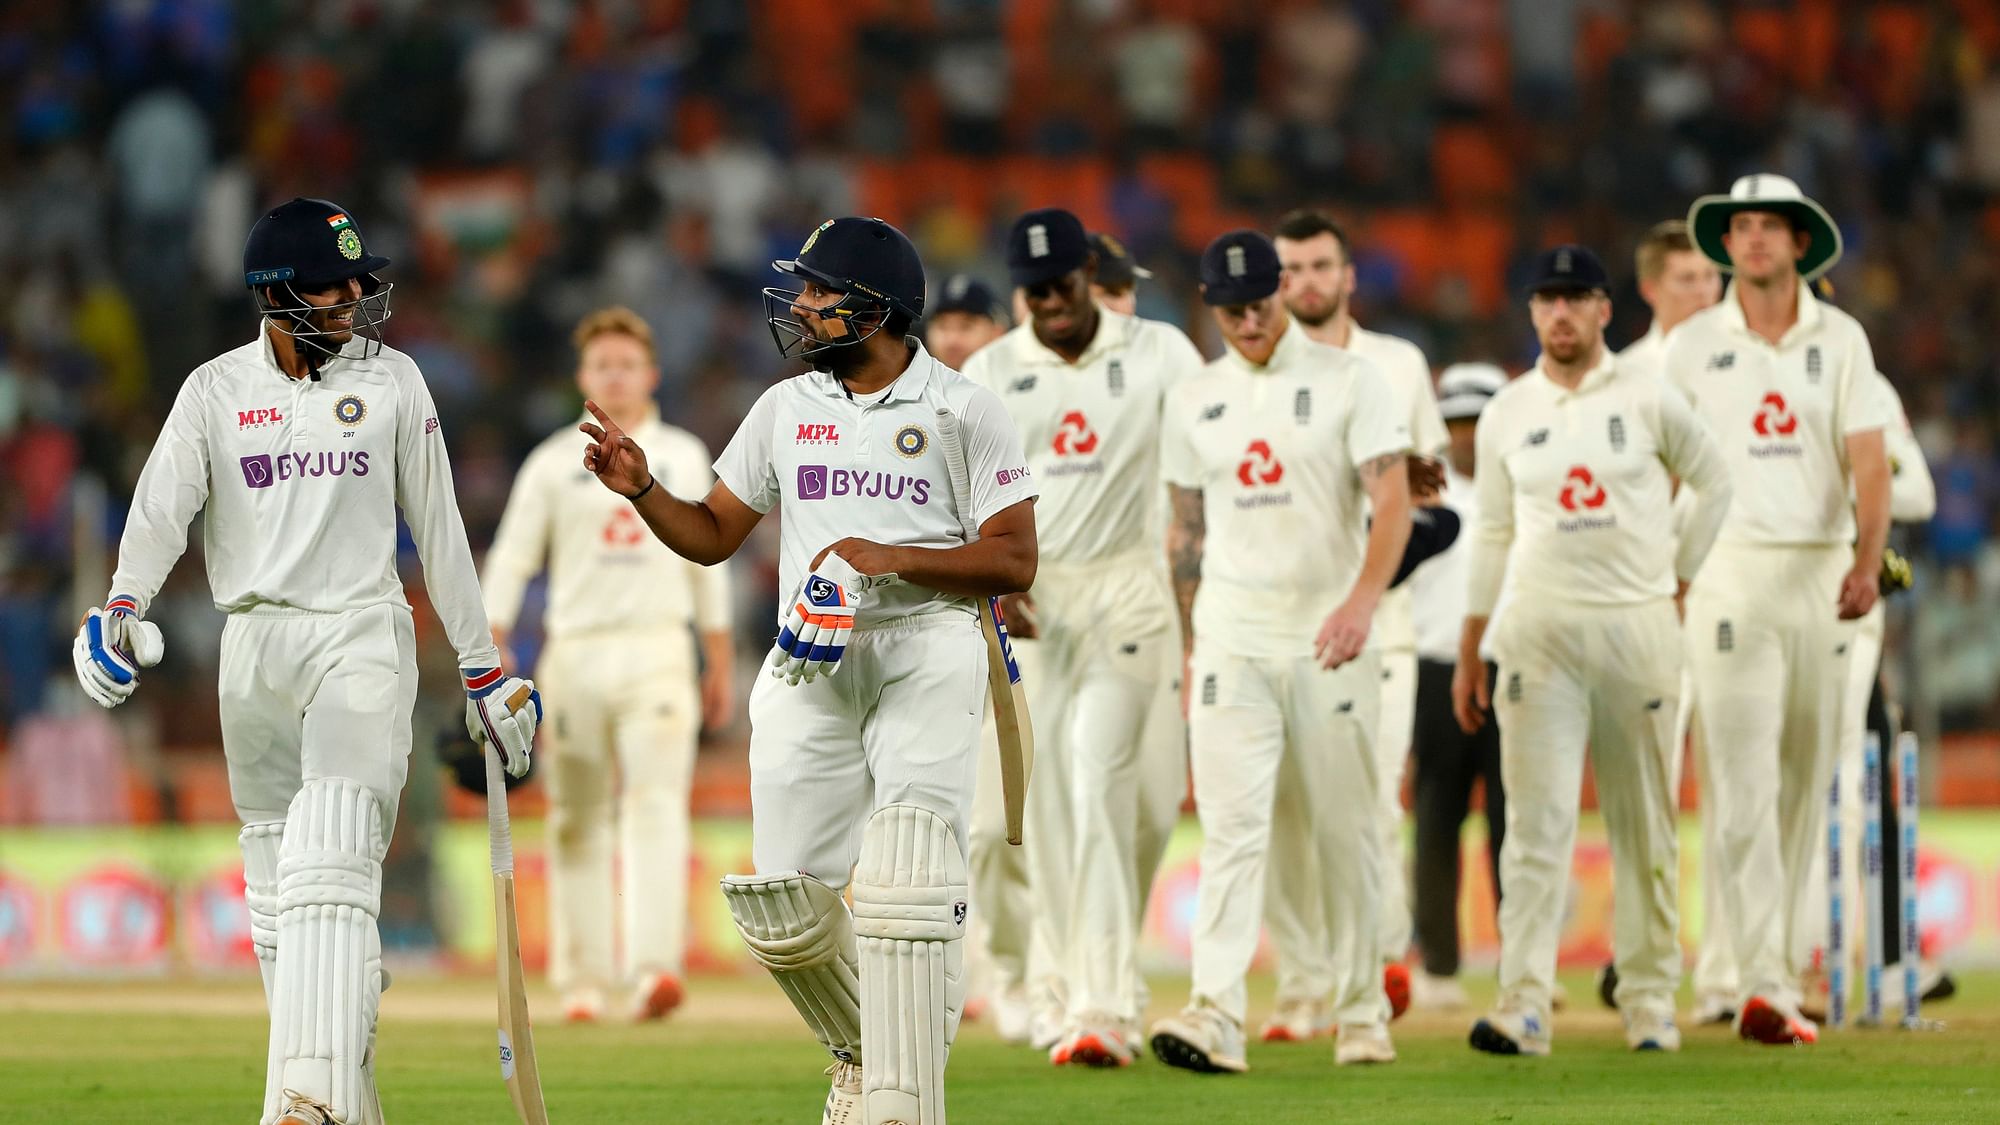 Rohit Sharma of India and Shubman Gill of India coming out after winning the match during day two of the third PayTM test match between India and England.